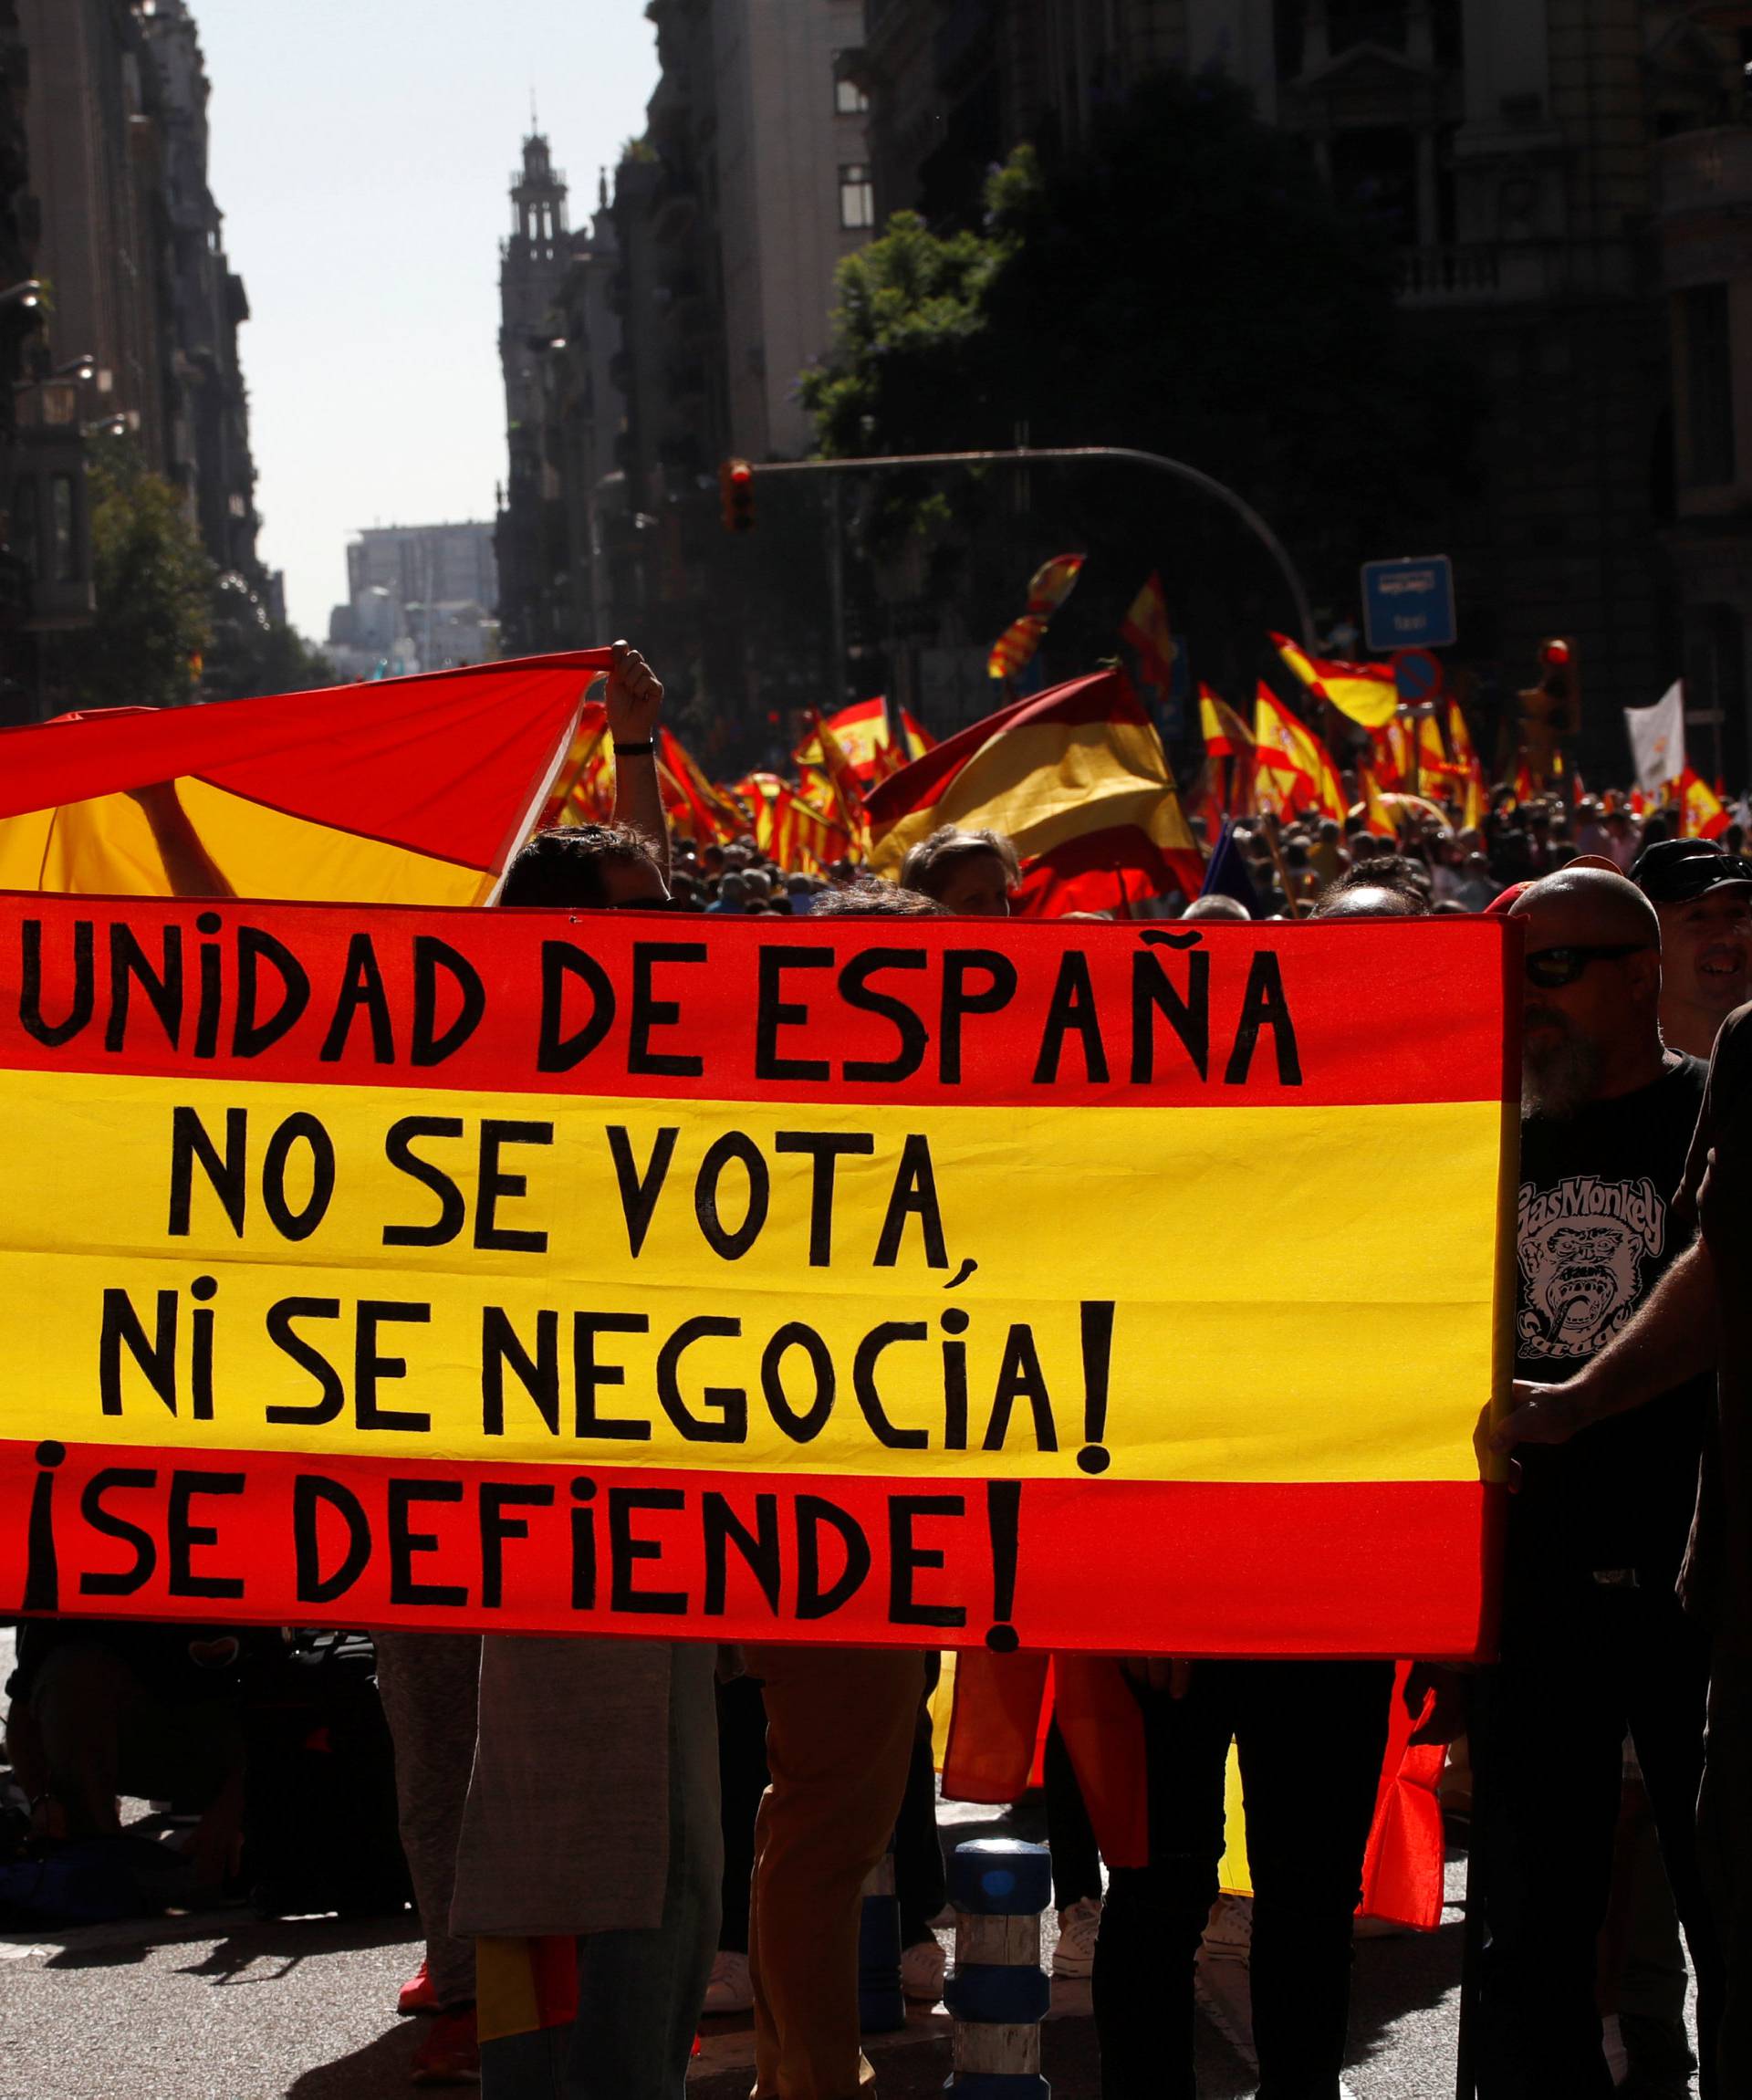 People hold a Spanish flag which reads "The unity of Spain can not be voted on or negotiated, it must be defended" during a pro-union demonstration organised by the Catalan Civil Society organisation in Barcelona